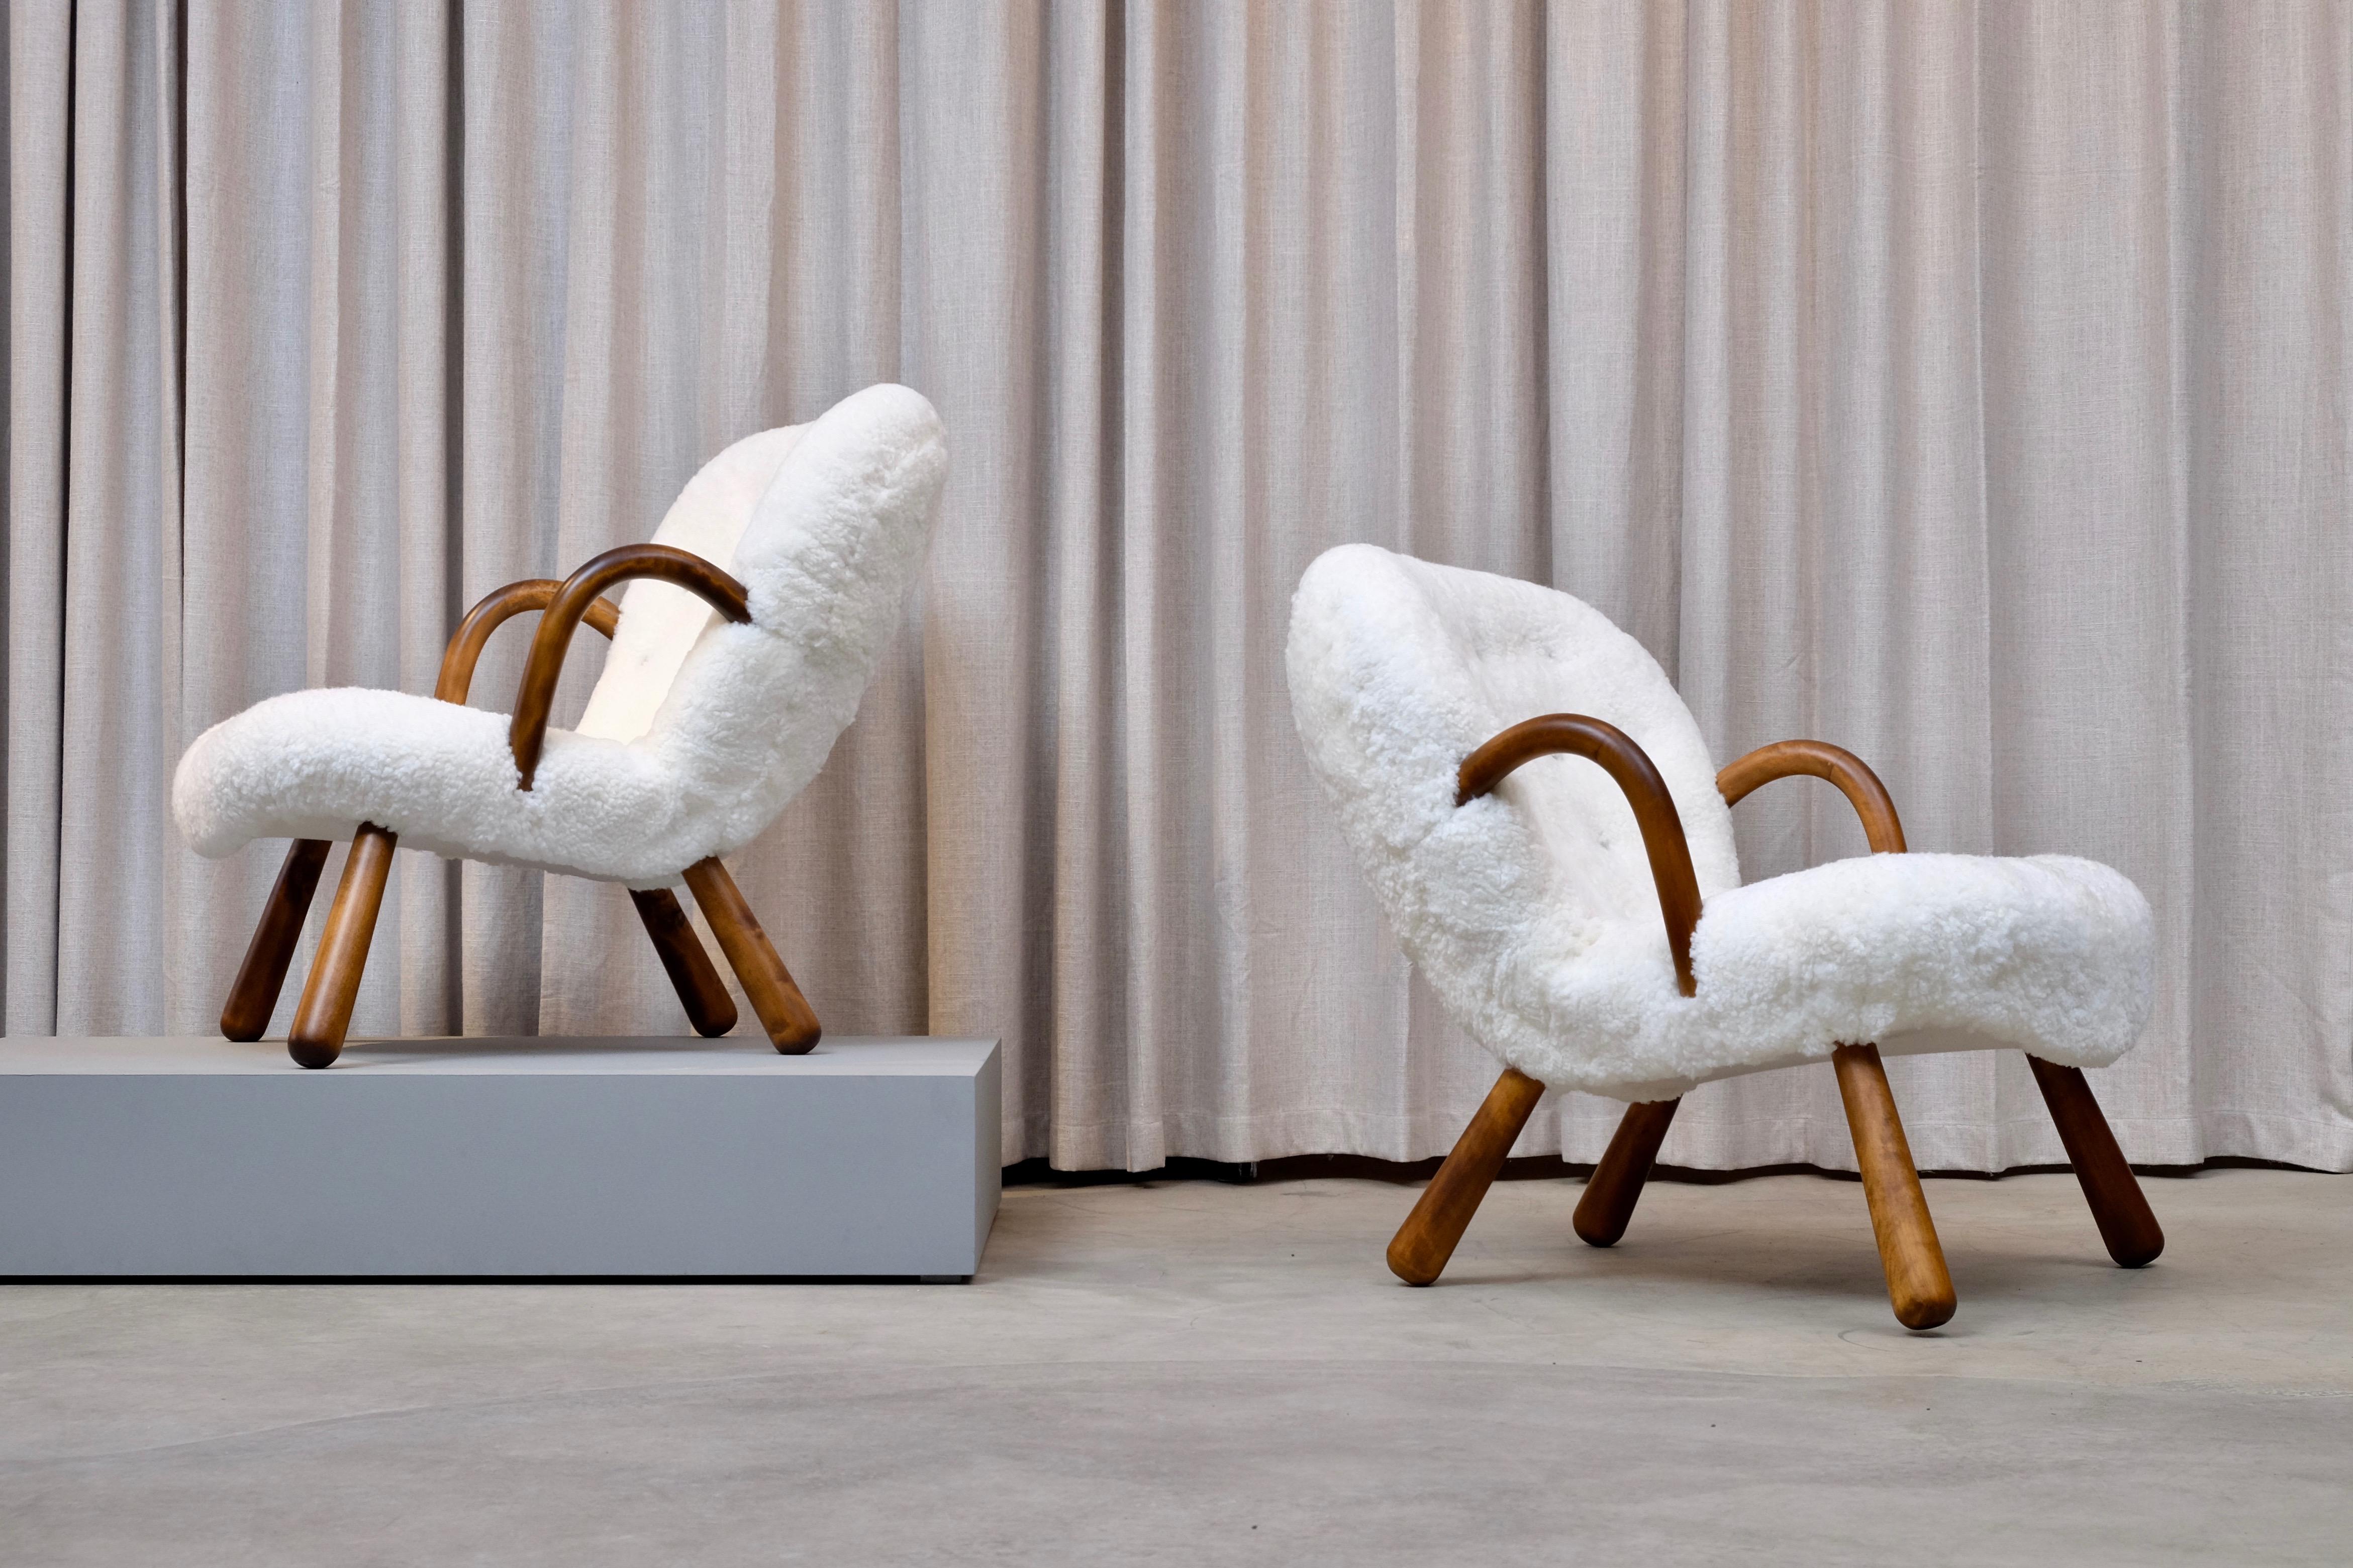 Scandinavian Modern Philip Arctander Clam Chairs by Nordisk Stål & Møbel Central in Denmark, 1940s